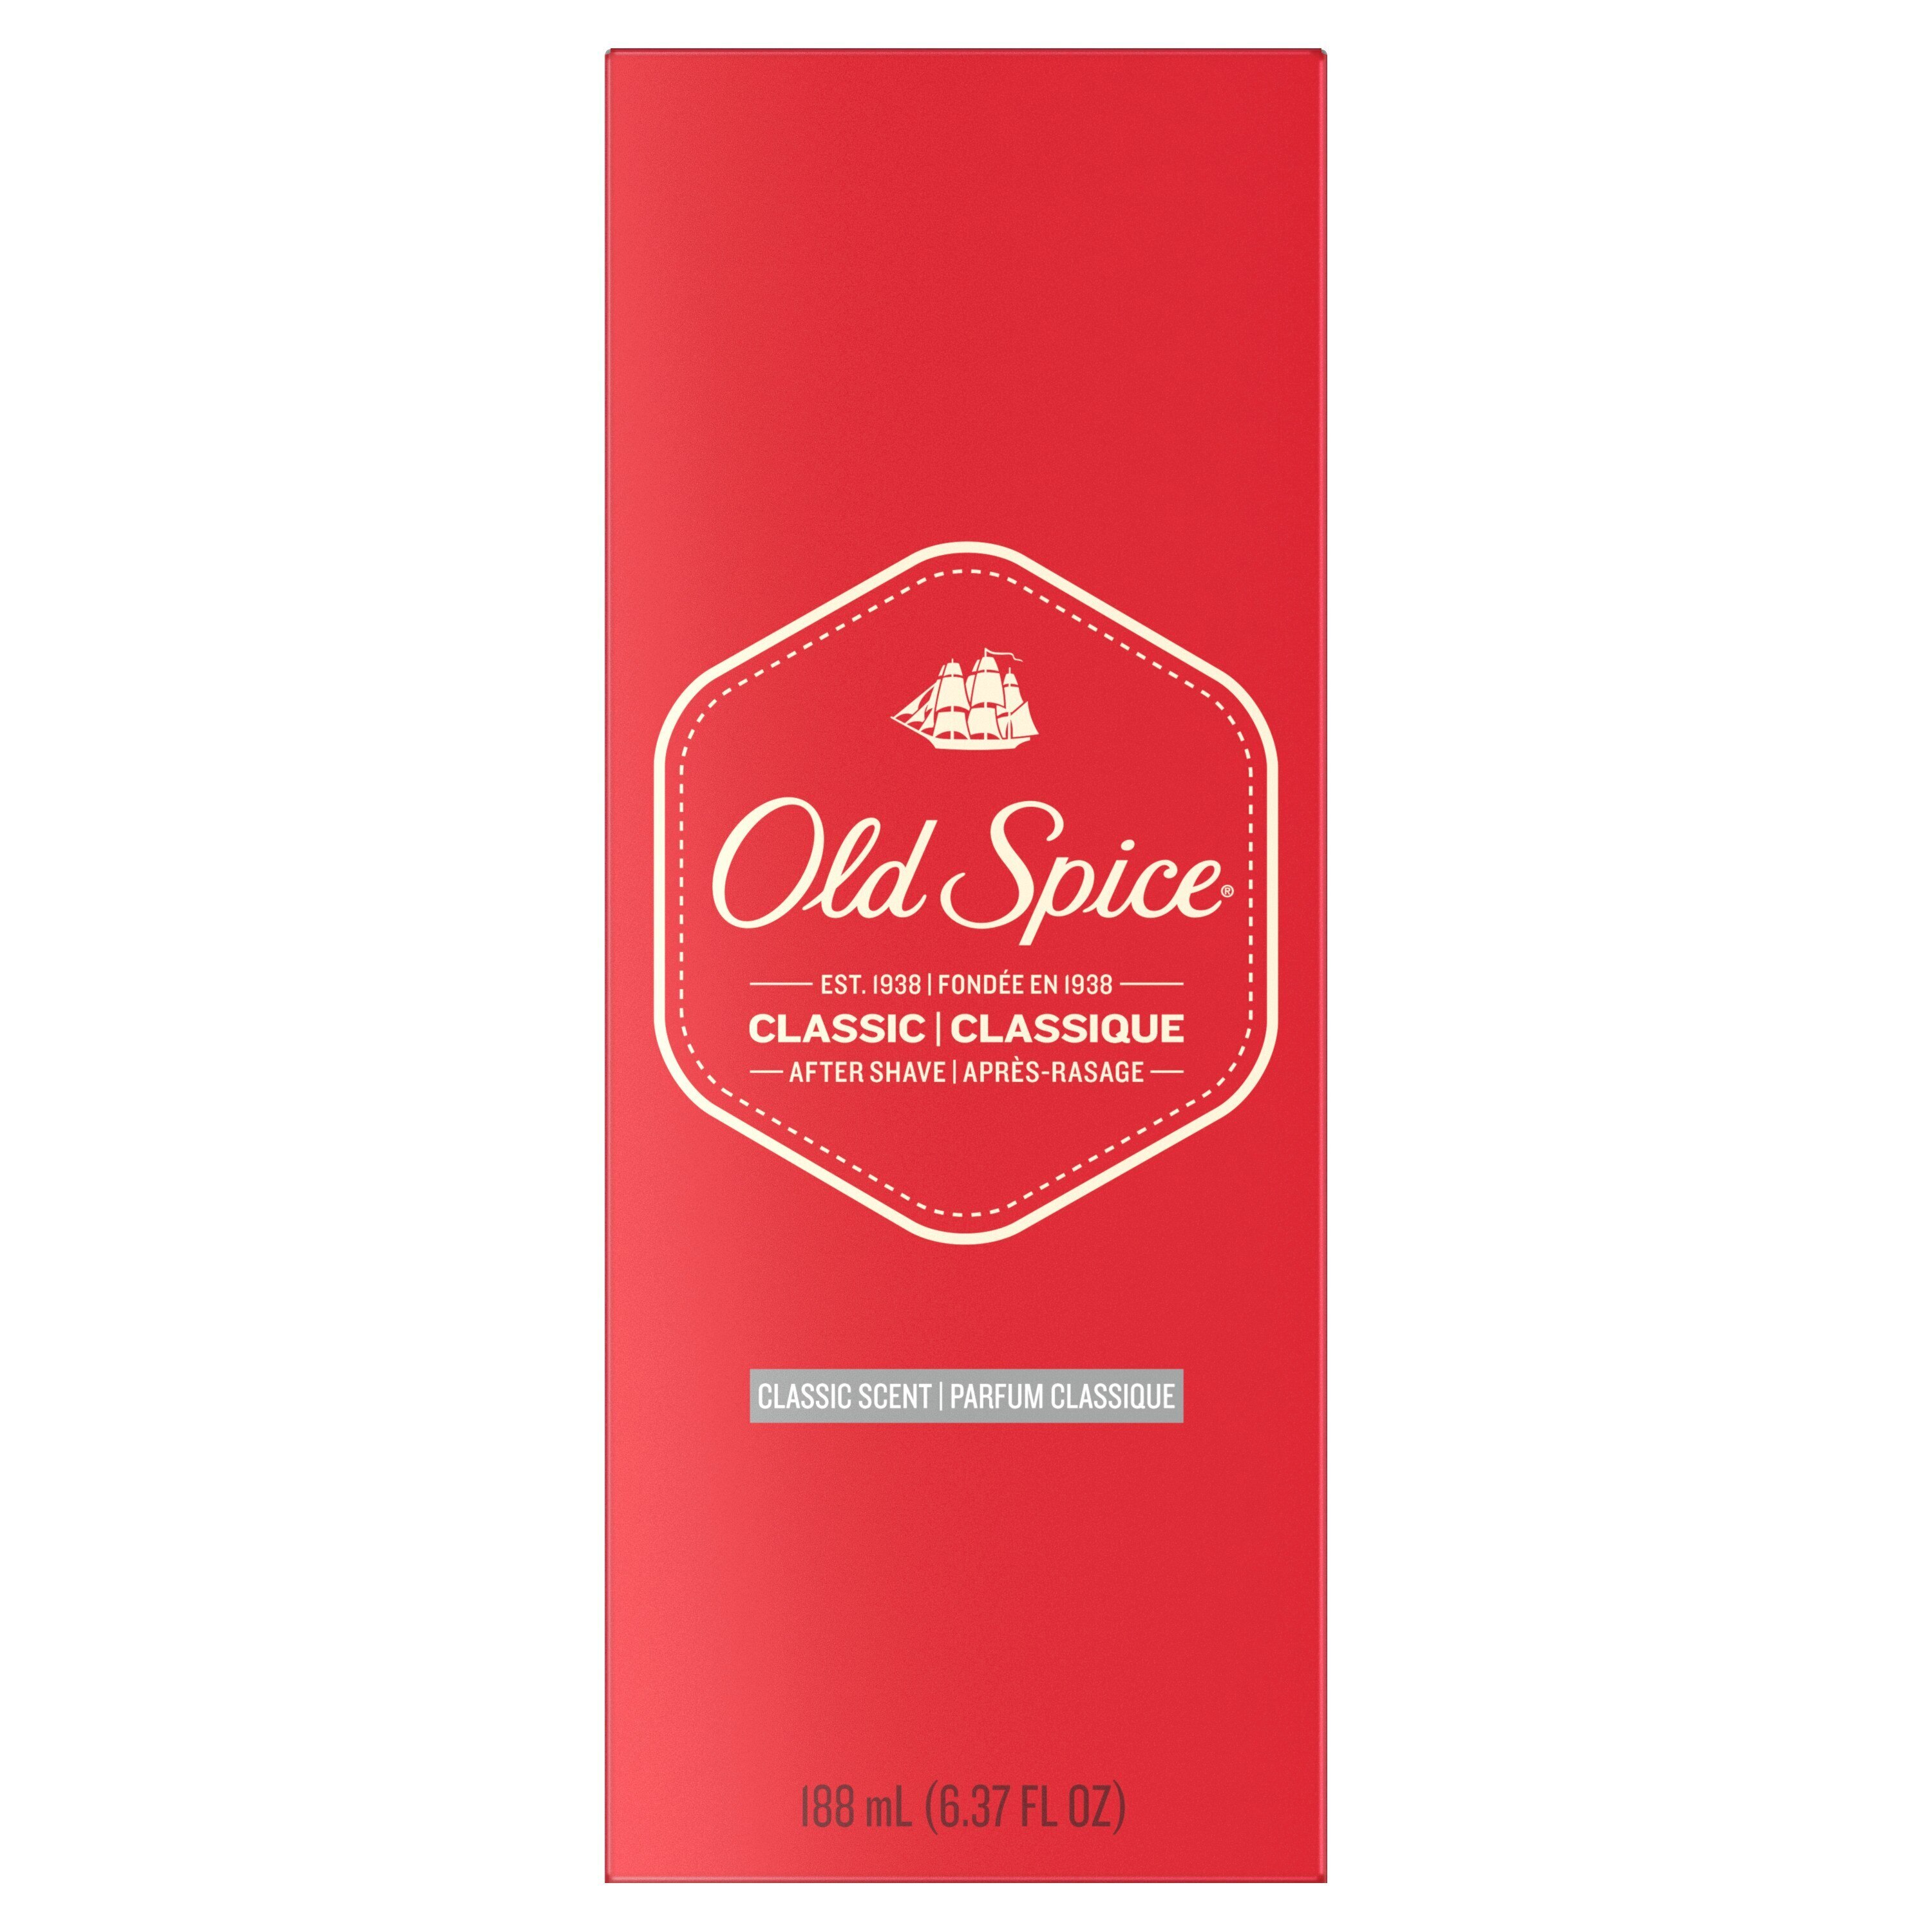 Old Spice Men's After Shave, Classic